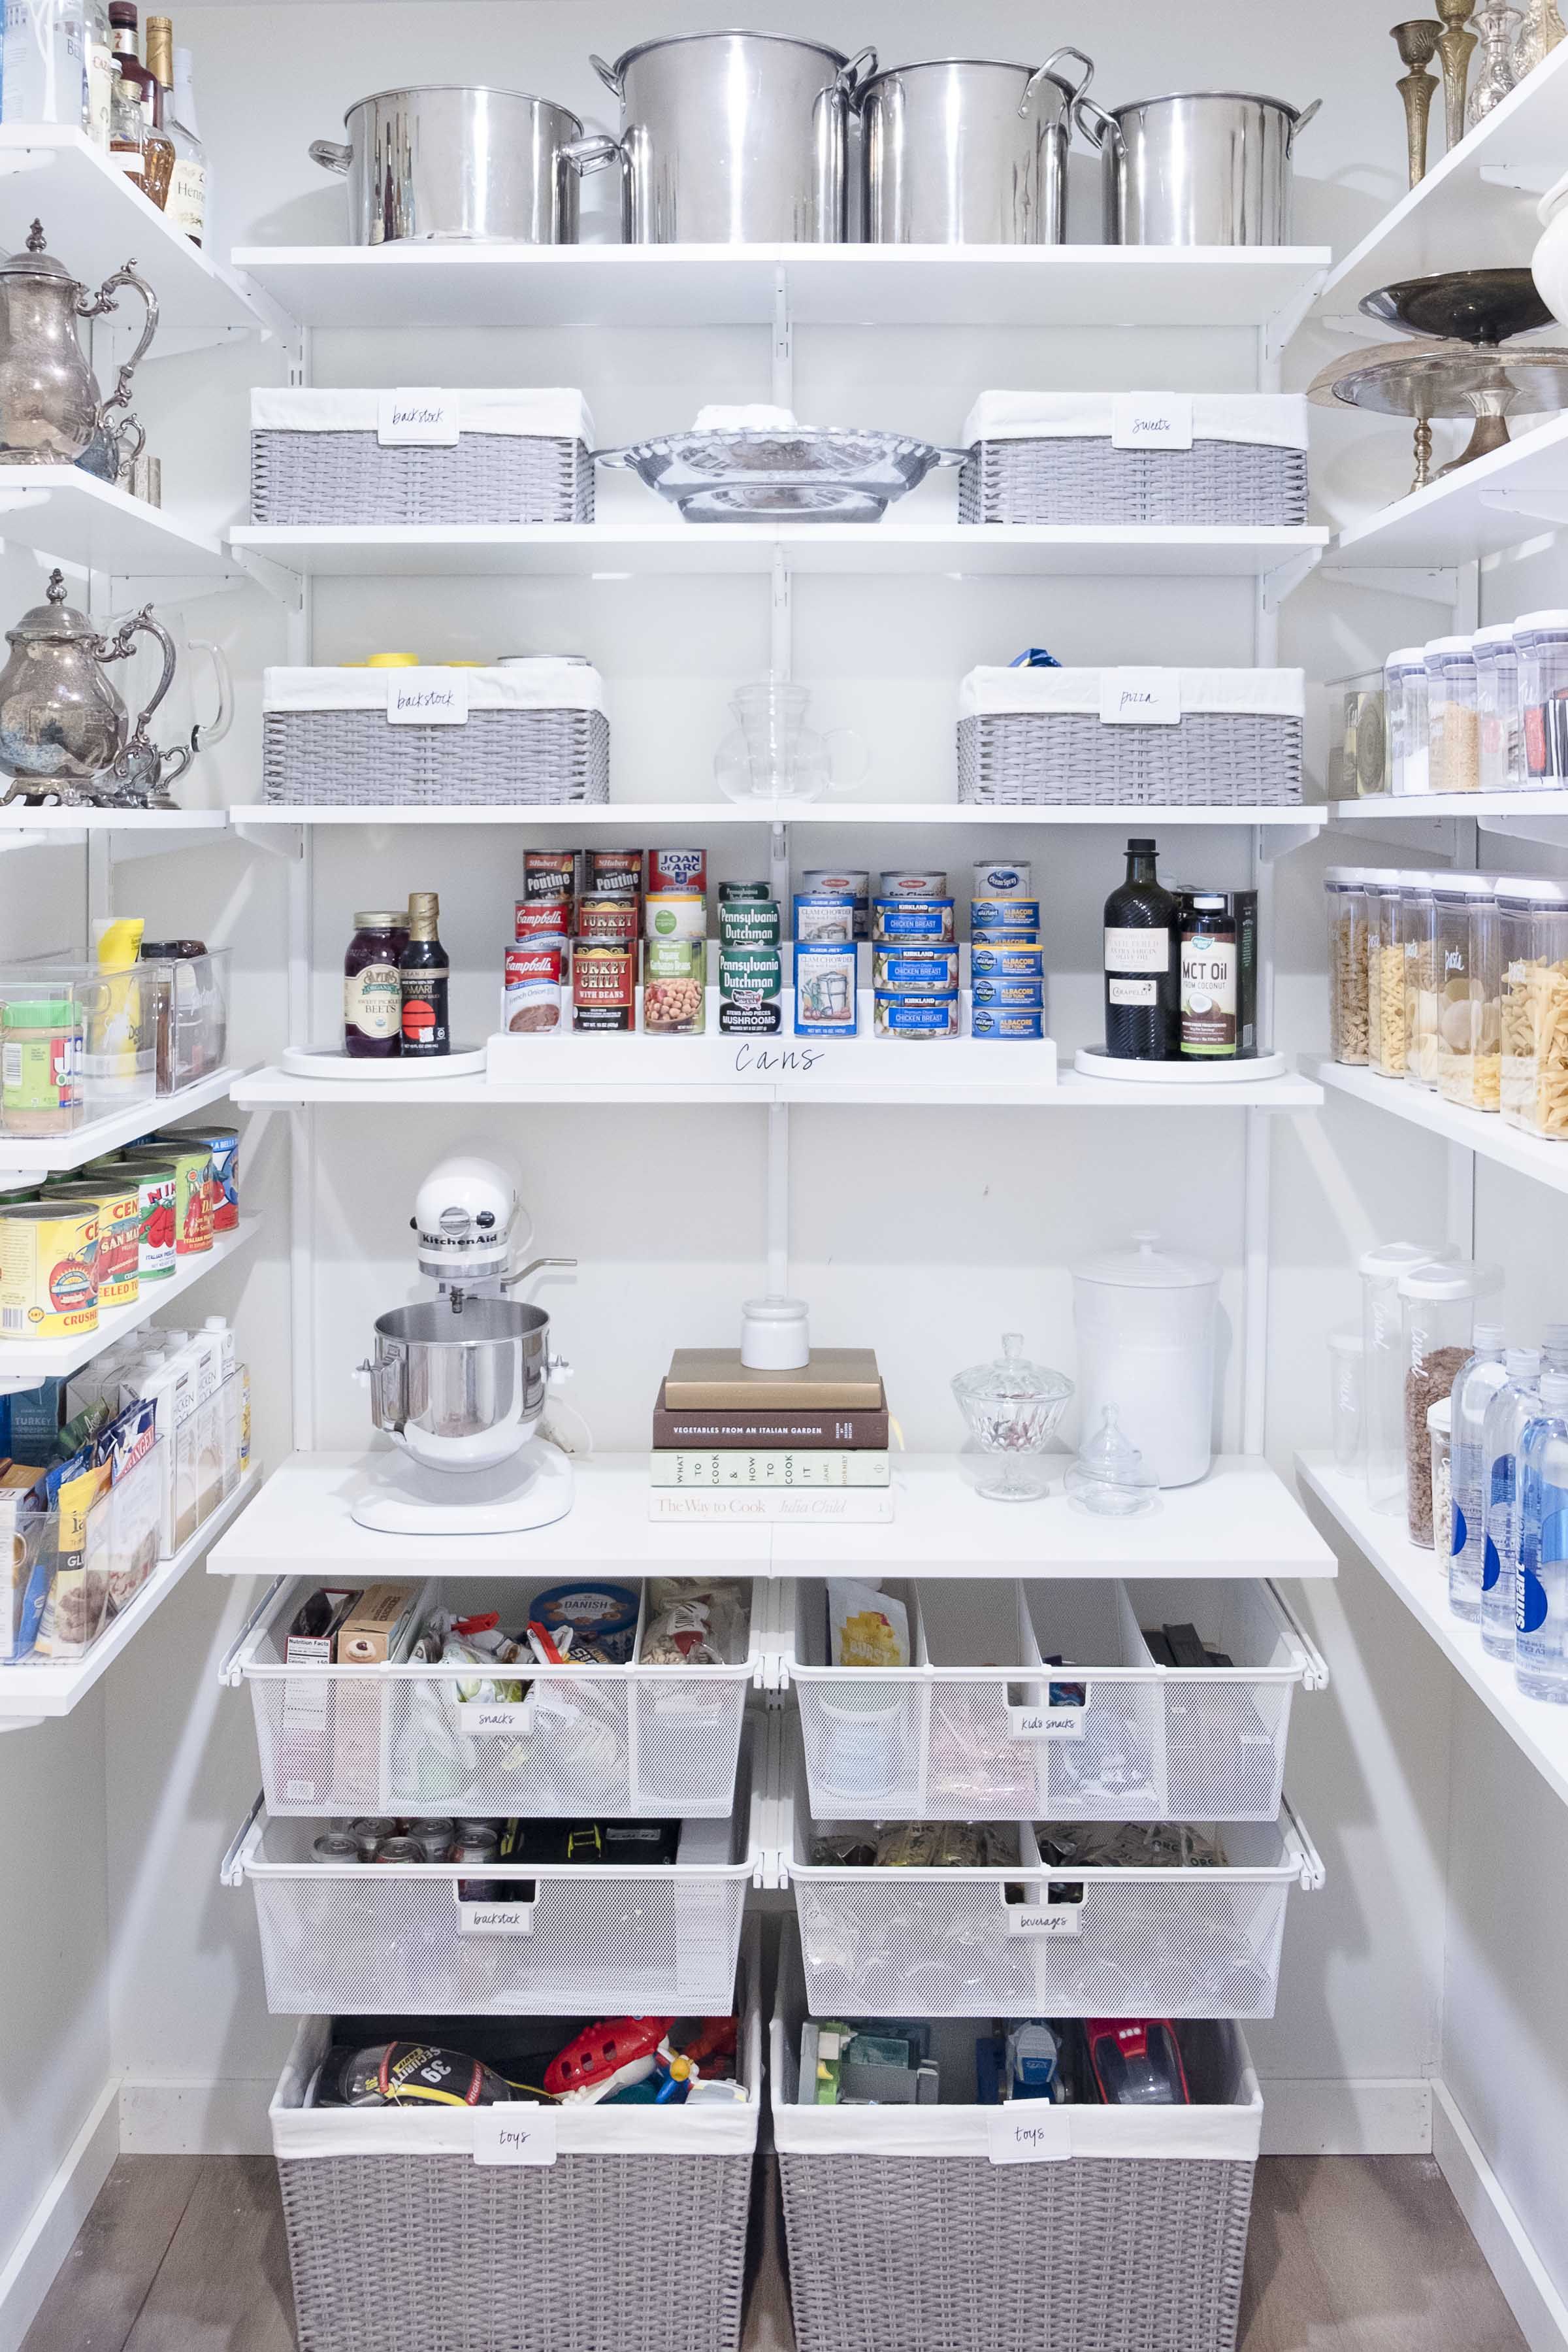 How to Organize Your Kitchen, According to The Home Edit